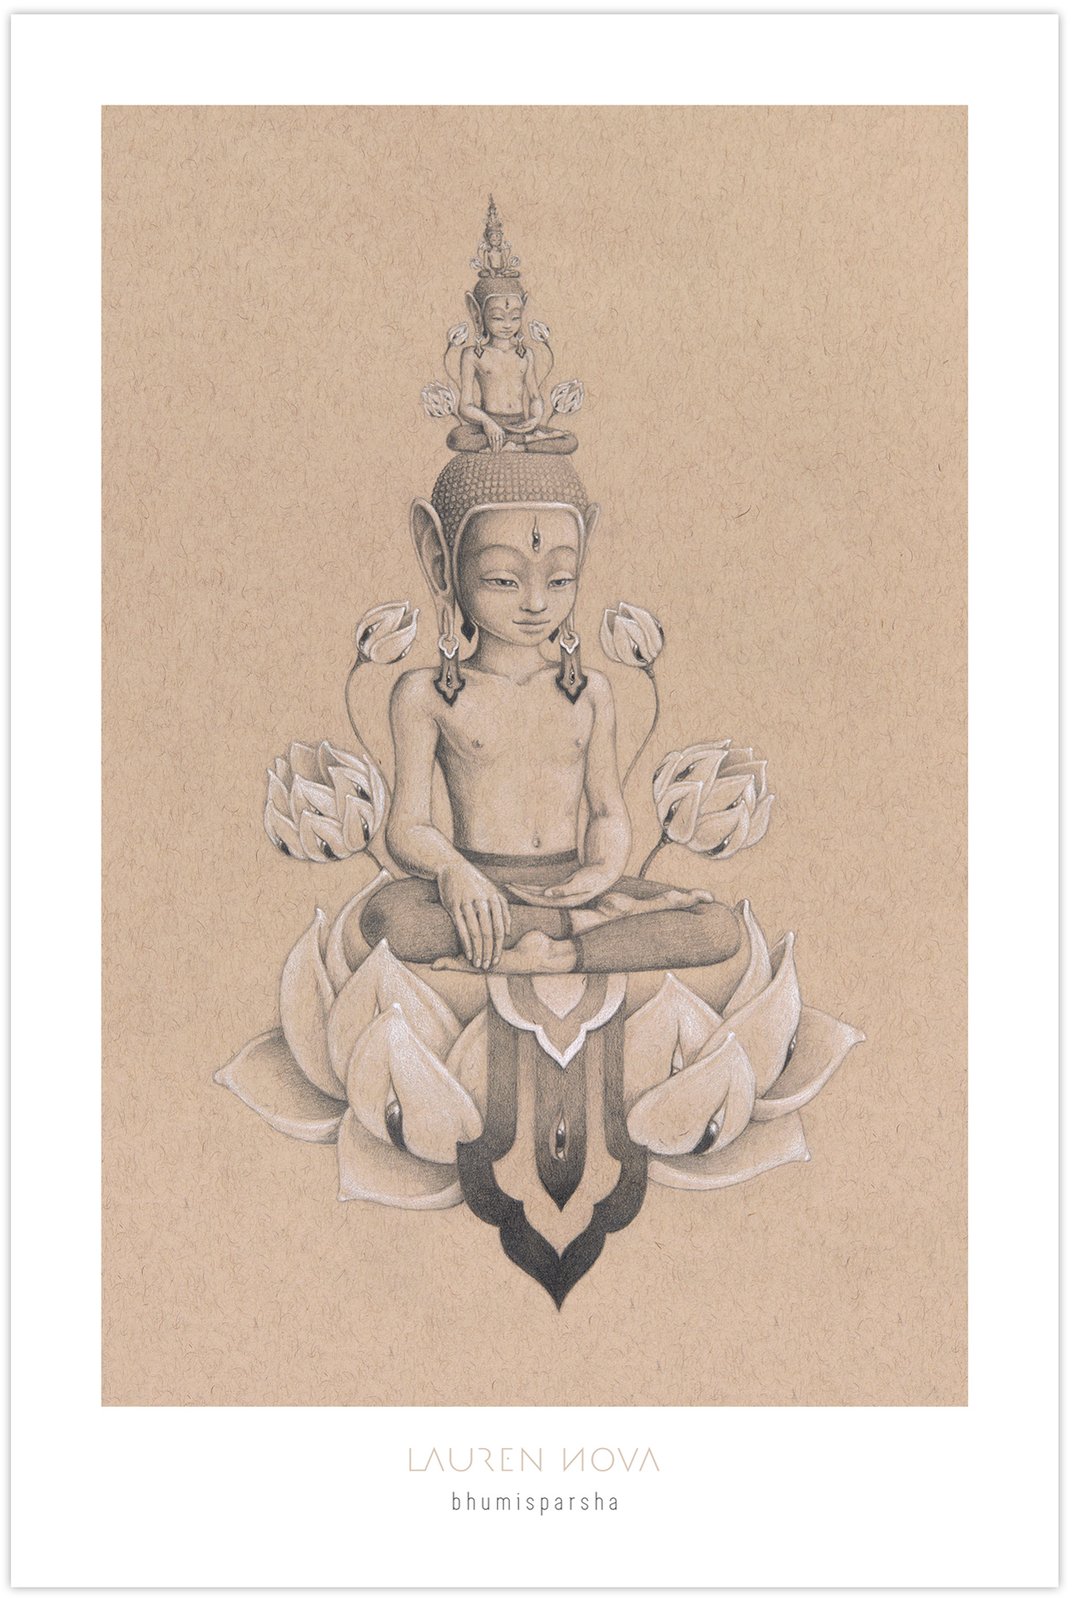 Chintachakra White Wish-Granting Wheel Tara: The All-in-One Mother of  Buddhas in Vajrayana Buddhism - Her Significance, Mantra and Why Her  Practice is Essential - Buddha Weekly: Buddhist Practices, Mindfulness,  Meditation